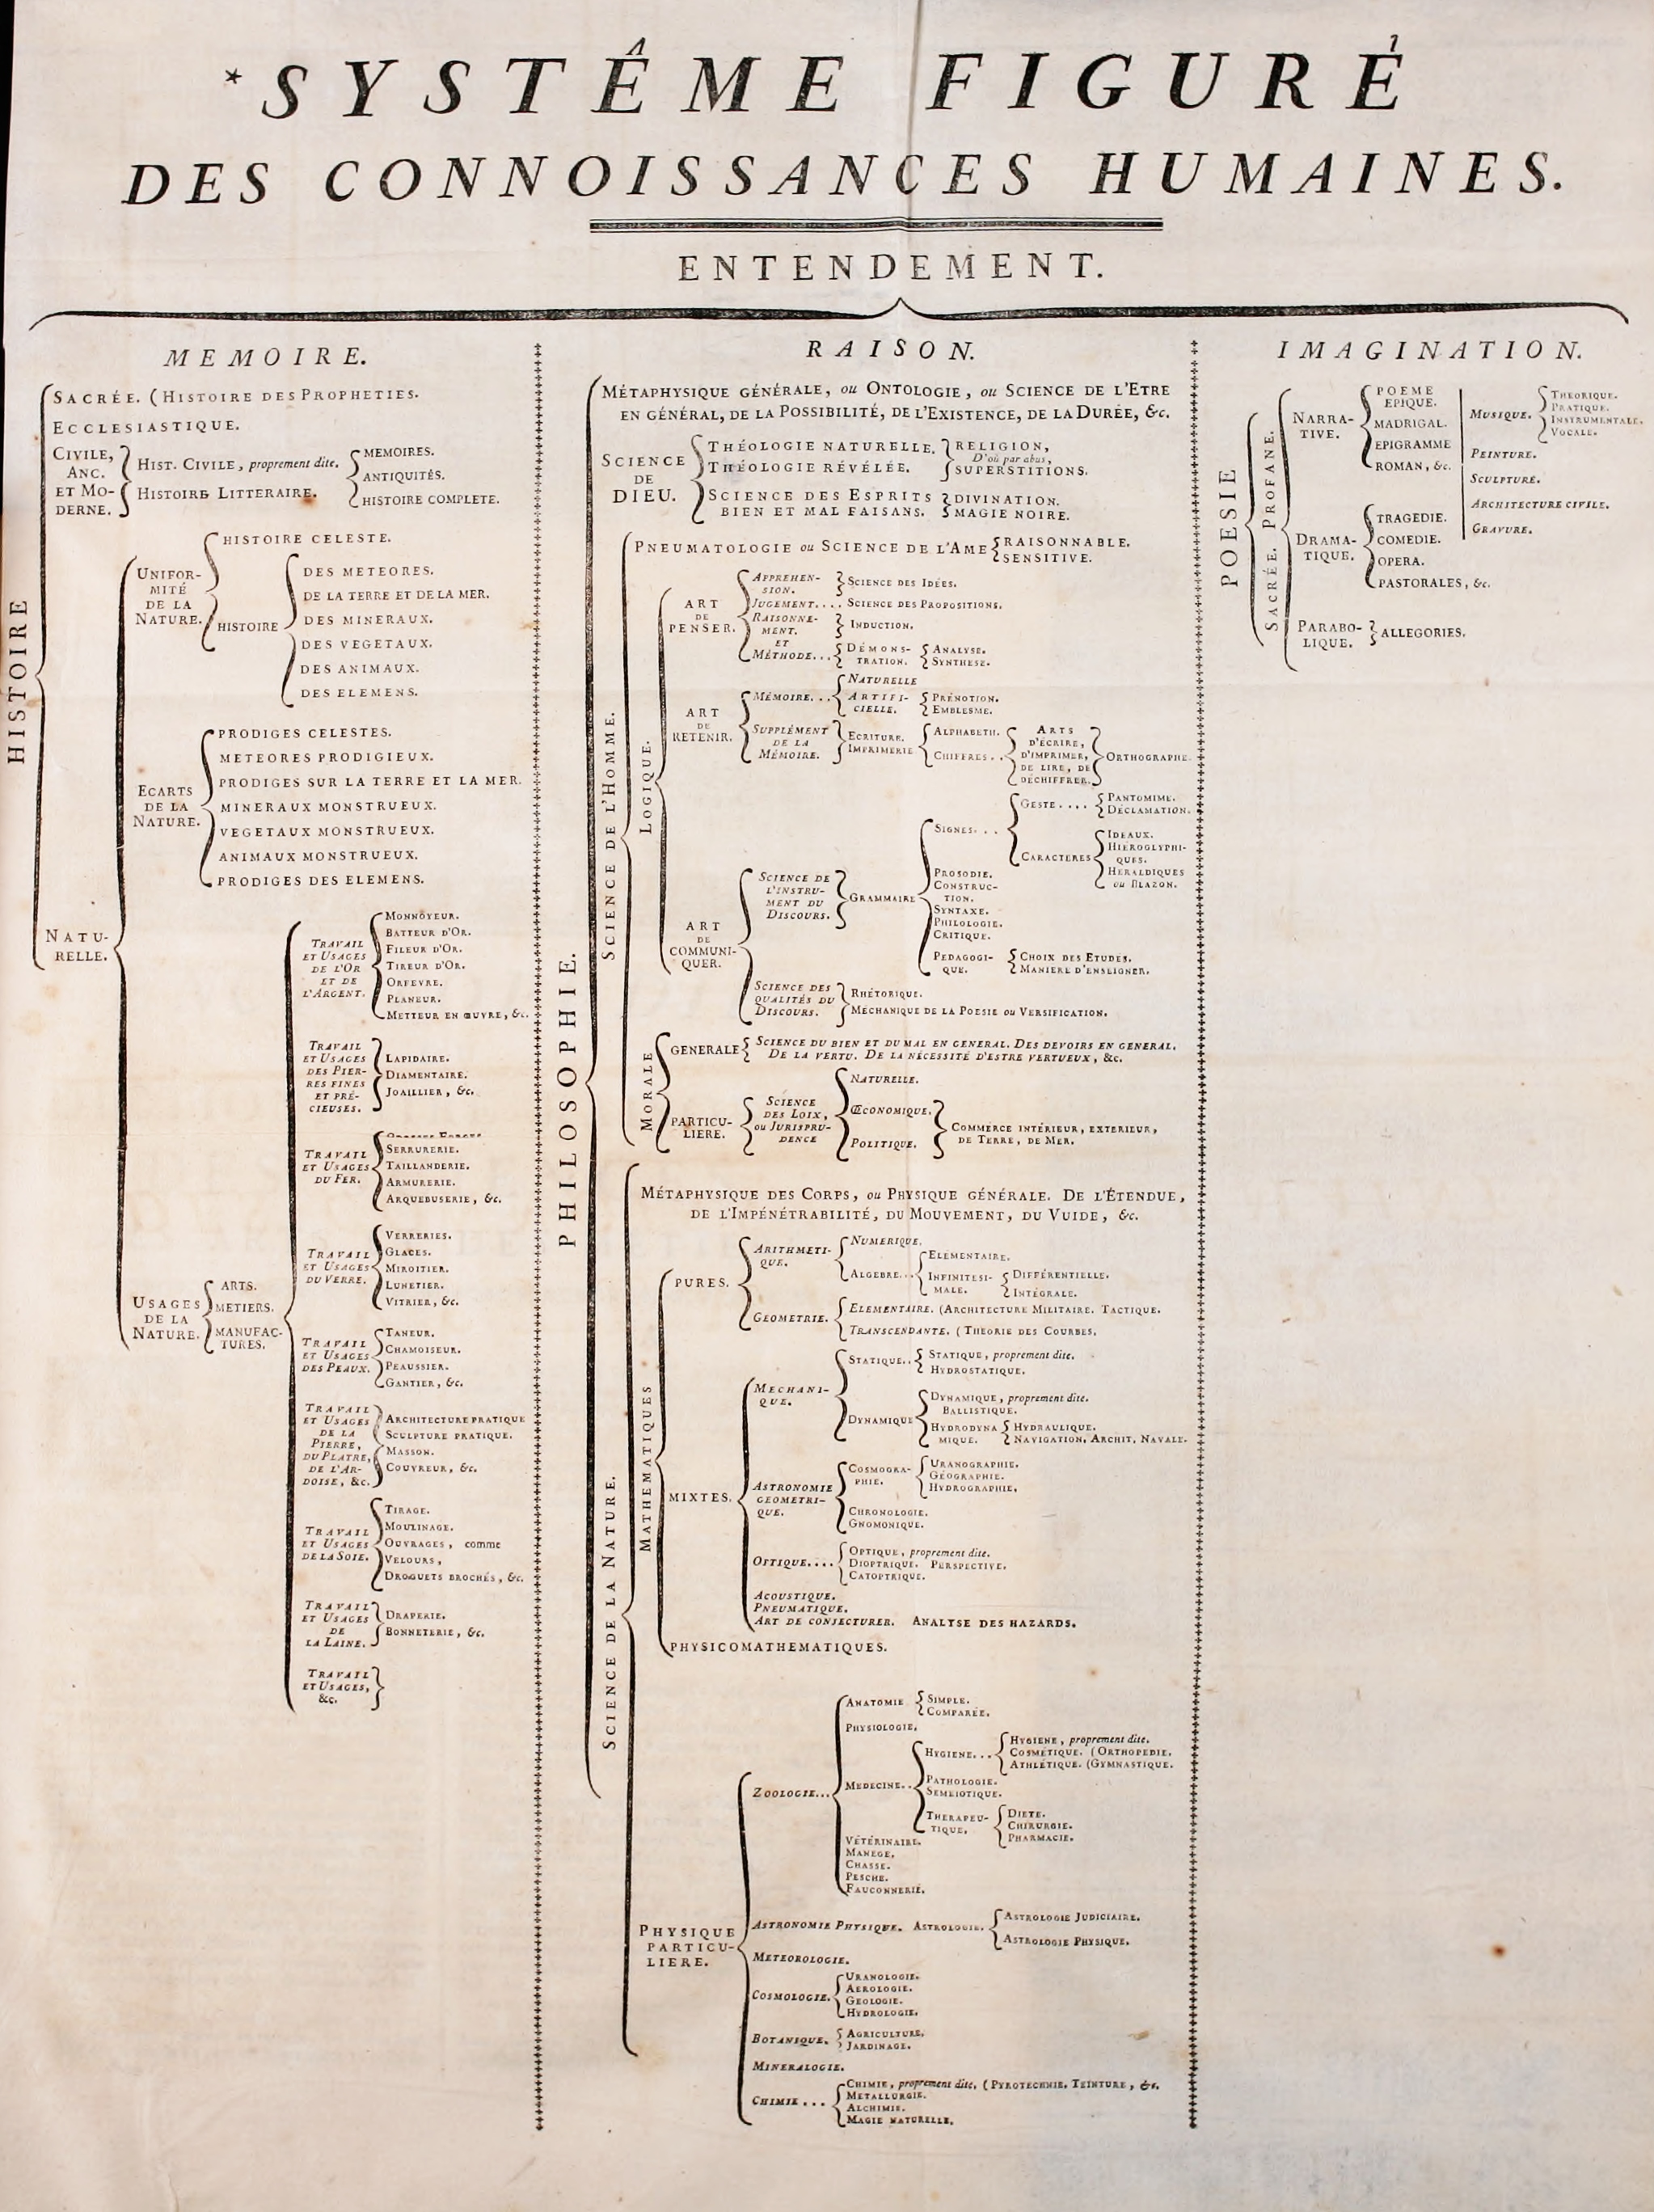 Classification of the structure of knowledge, produced for the Encyclopédie by d'Alembert and Diderot.